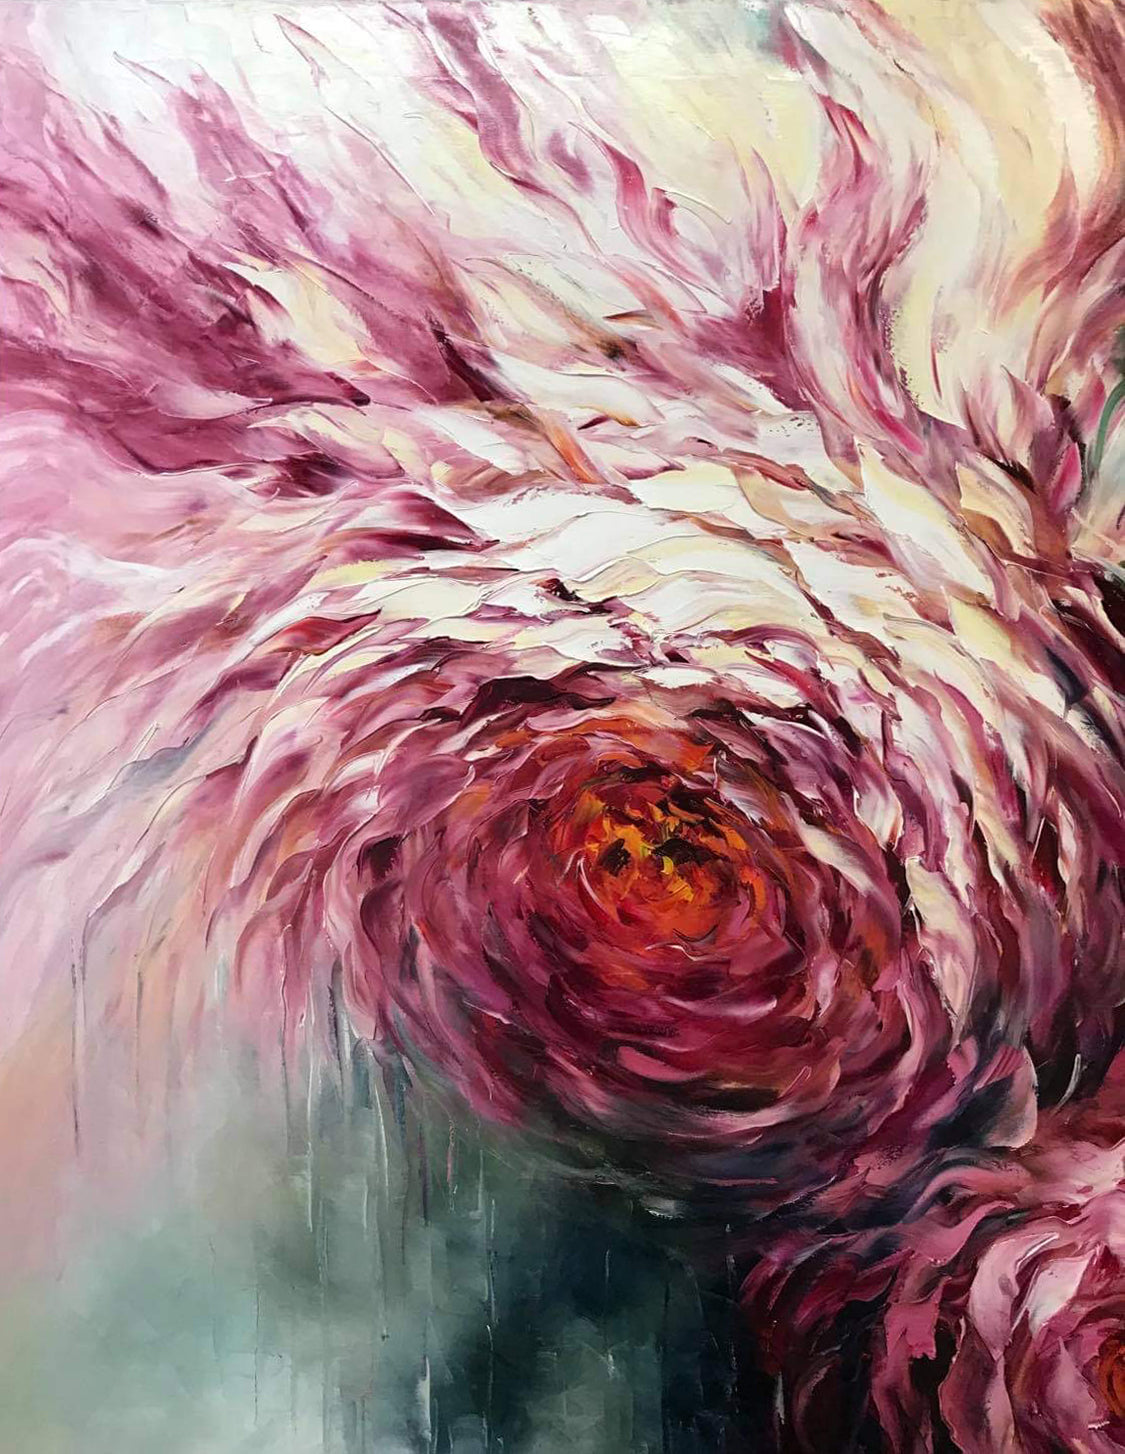 Large Abstract Flowers Painting on Canvas, Oversized Rose Flower Oil Painting, Extra Large Abstract Floral Wall Art